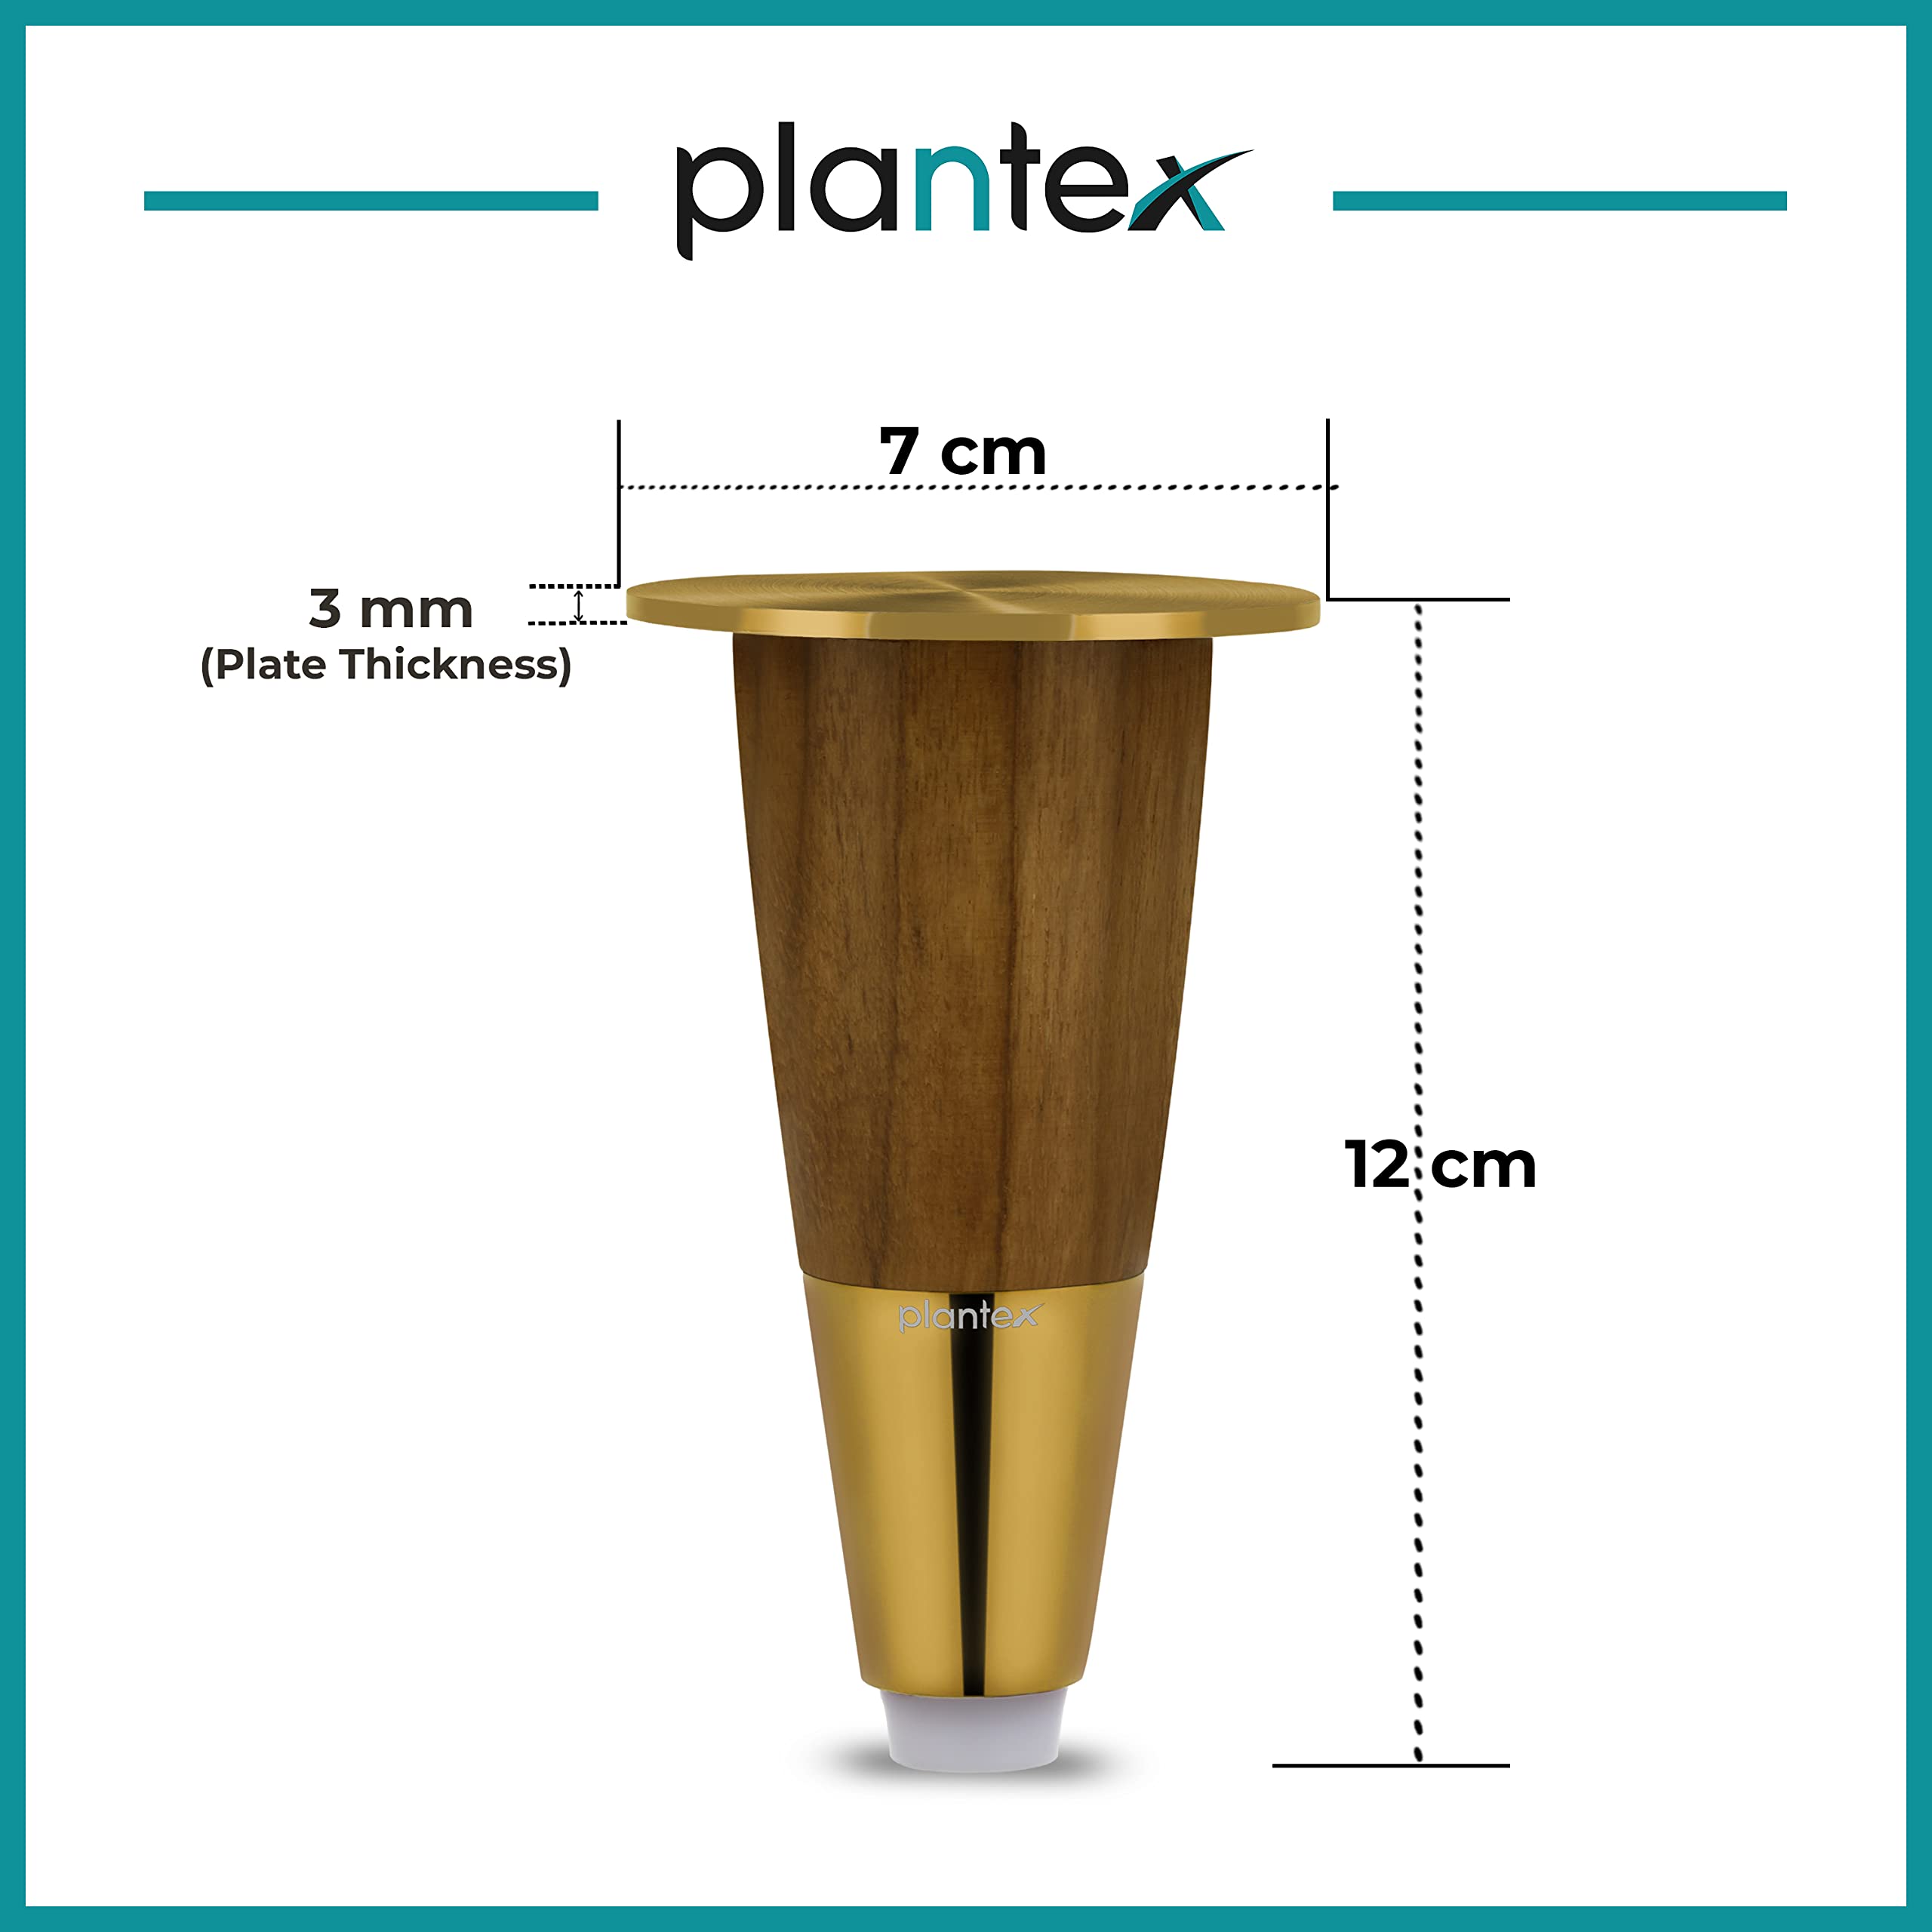 Plantex Stainless Steel and Wood 4 inch Sofa Leg/Bed Furniture Leg Pair for Home Furnitures (DTS-55-PVD Gold) – 4 Pcs